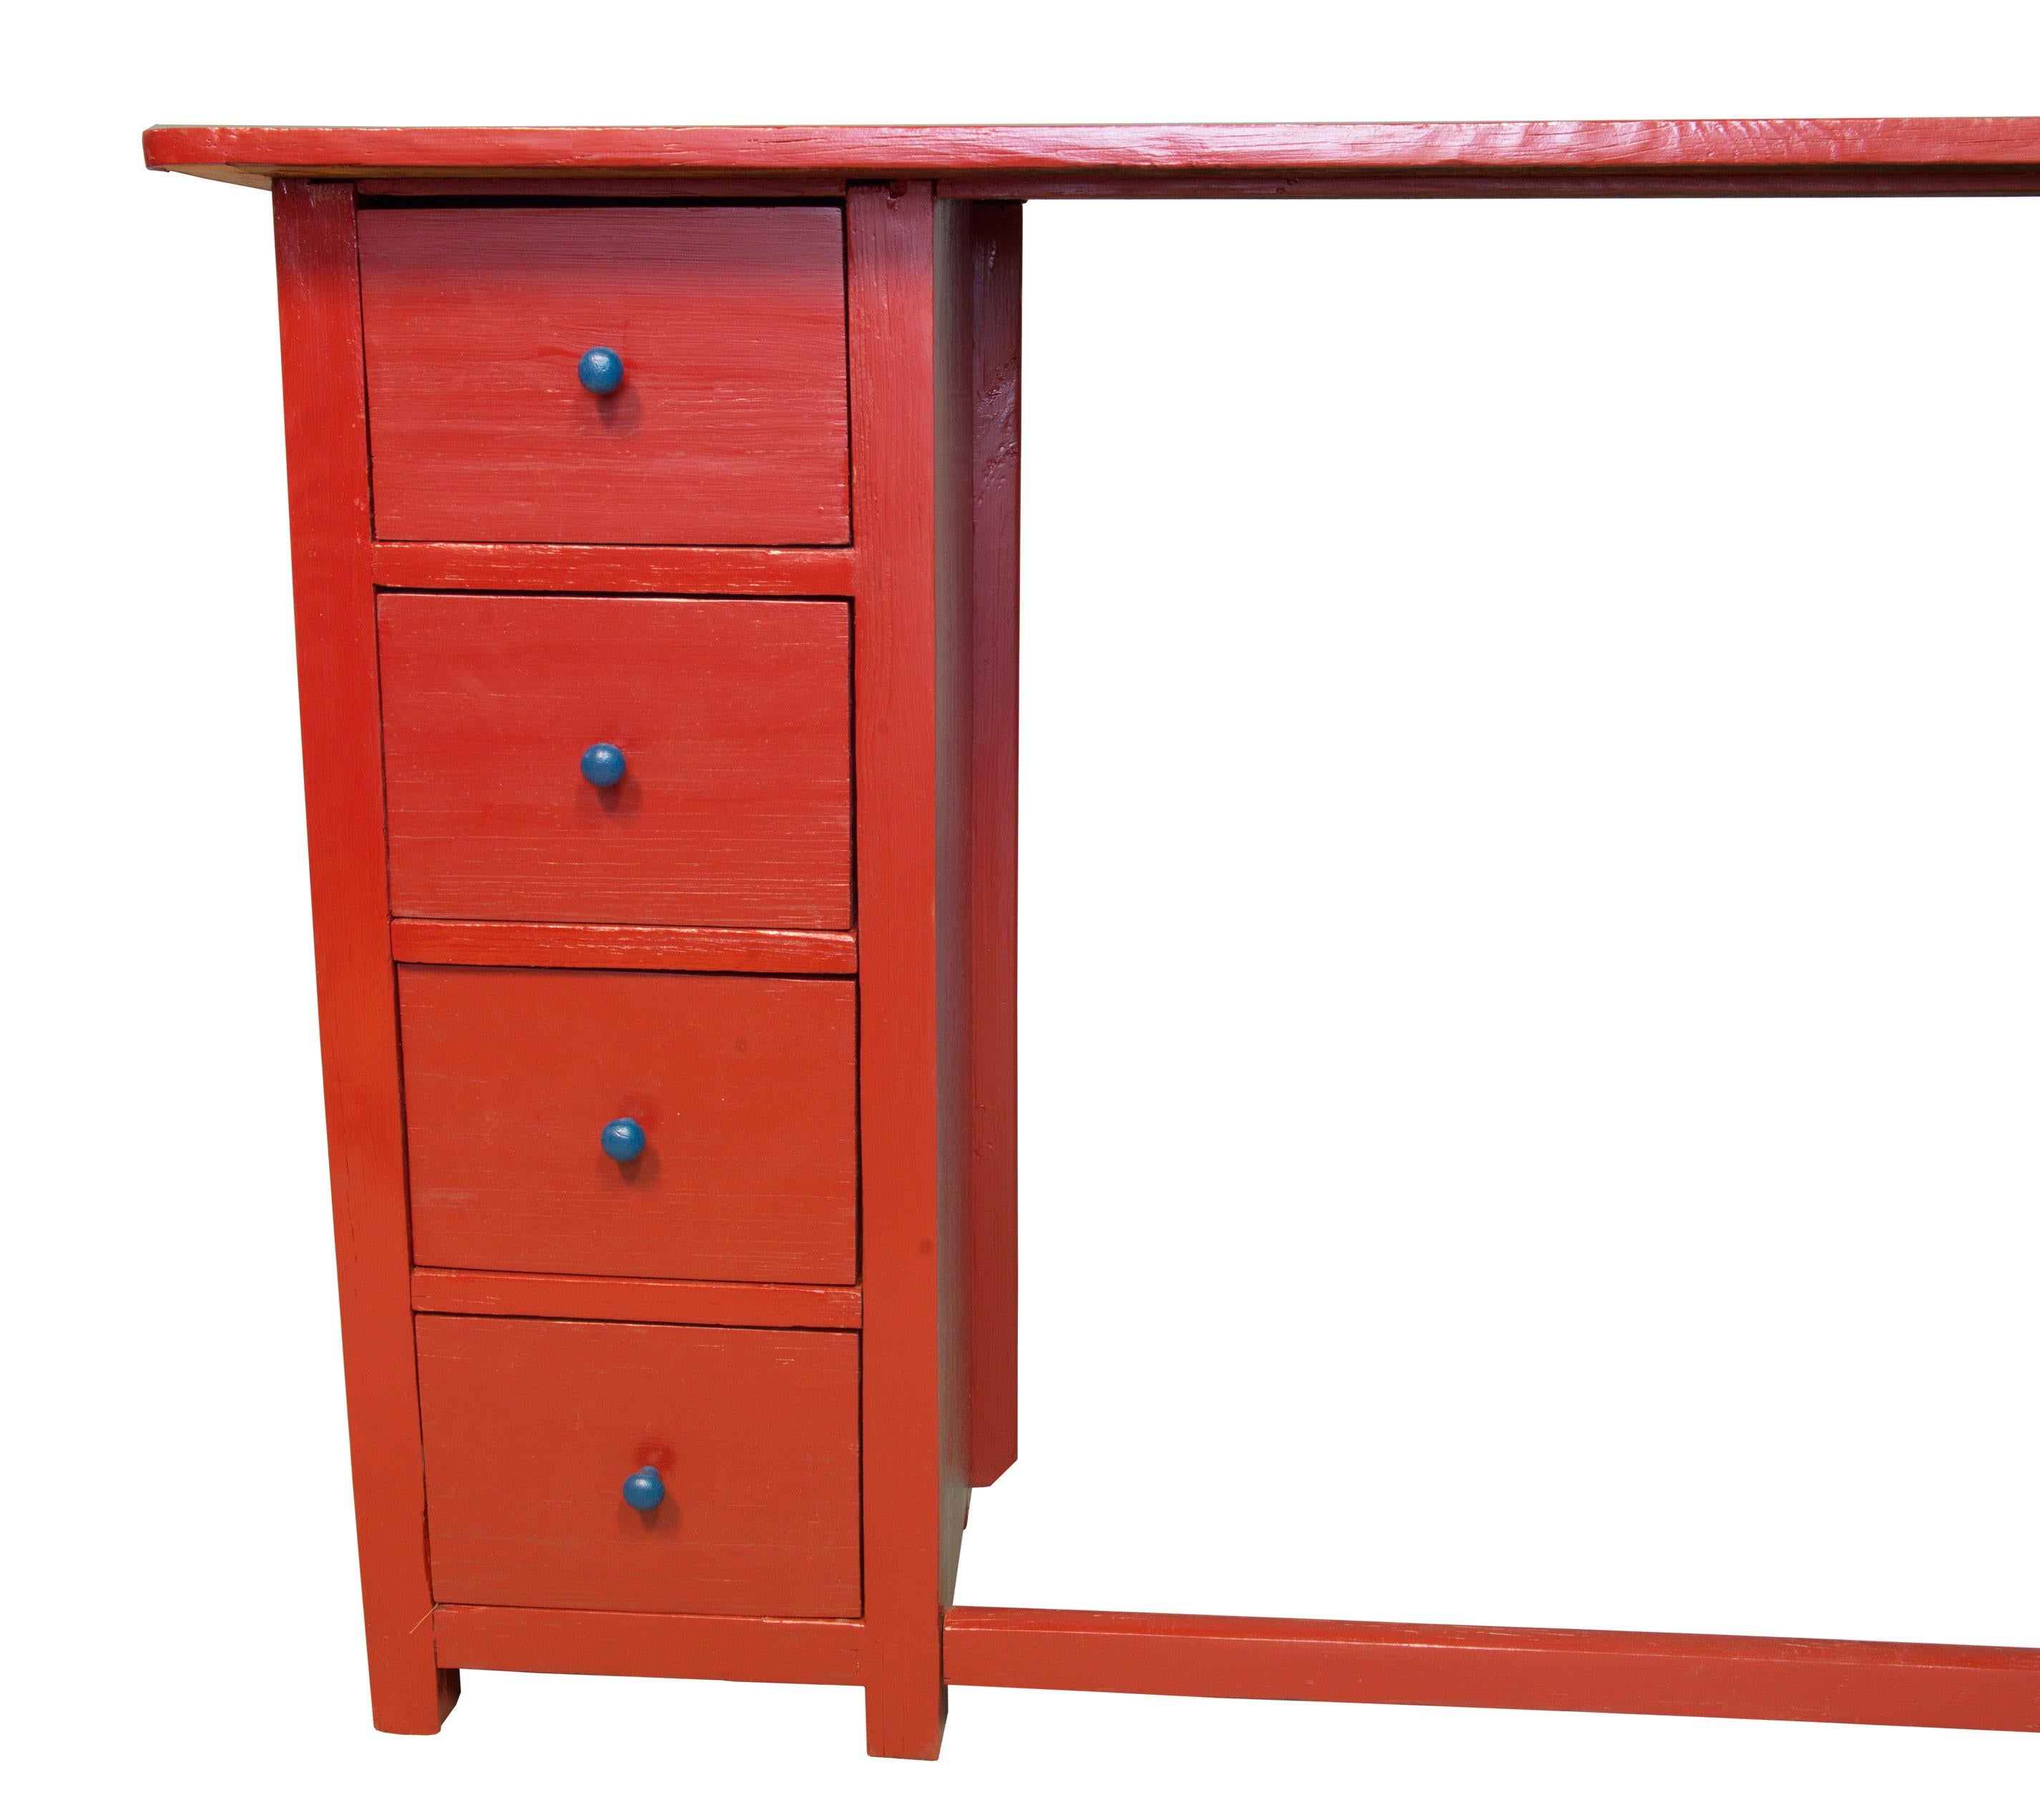 Painted 1920's Red and Blue Wooden Desk For Sale